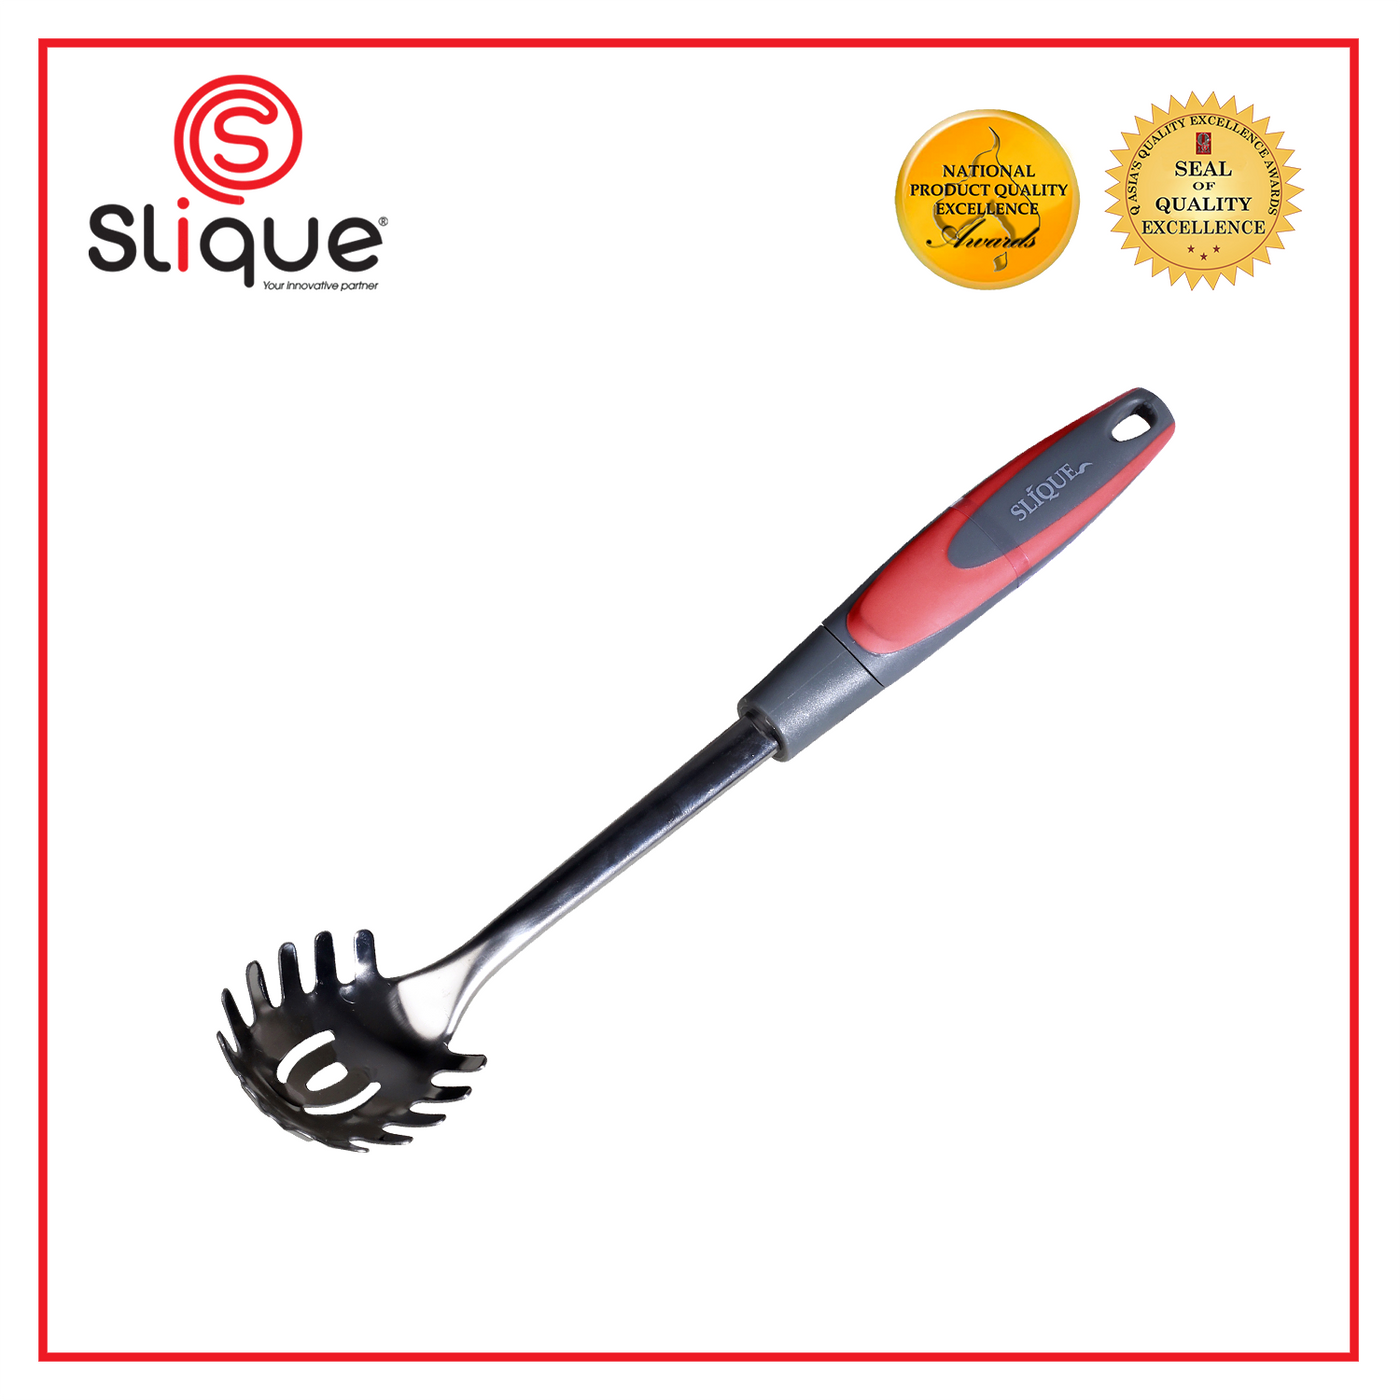 SLIQUE Premium 18/8 Stainless Steel Spaghetti Spoon TPR Silicone Handle Kitchen Essentials Amazing Gift Idea For Any Occasion! (Red)